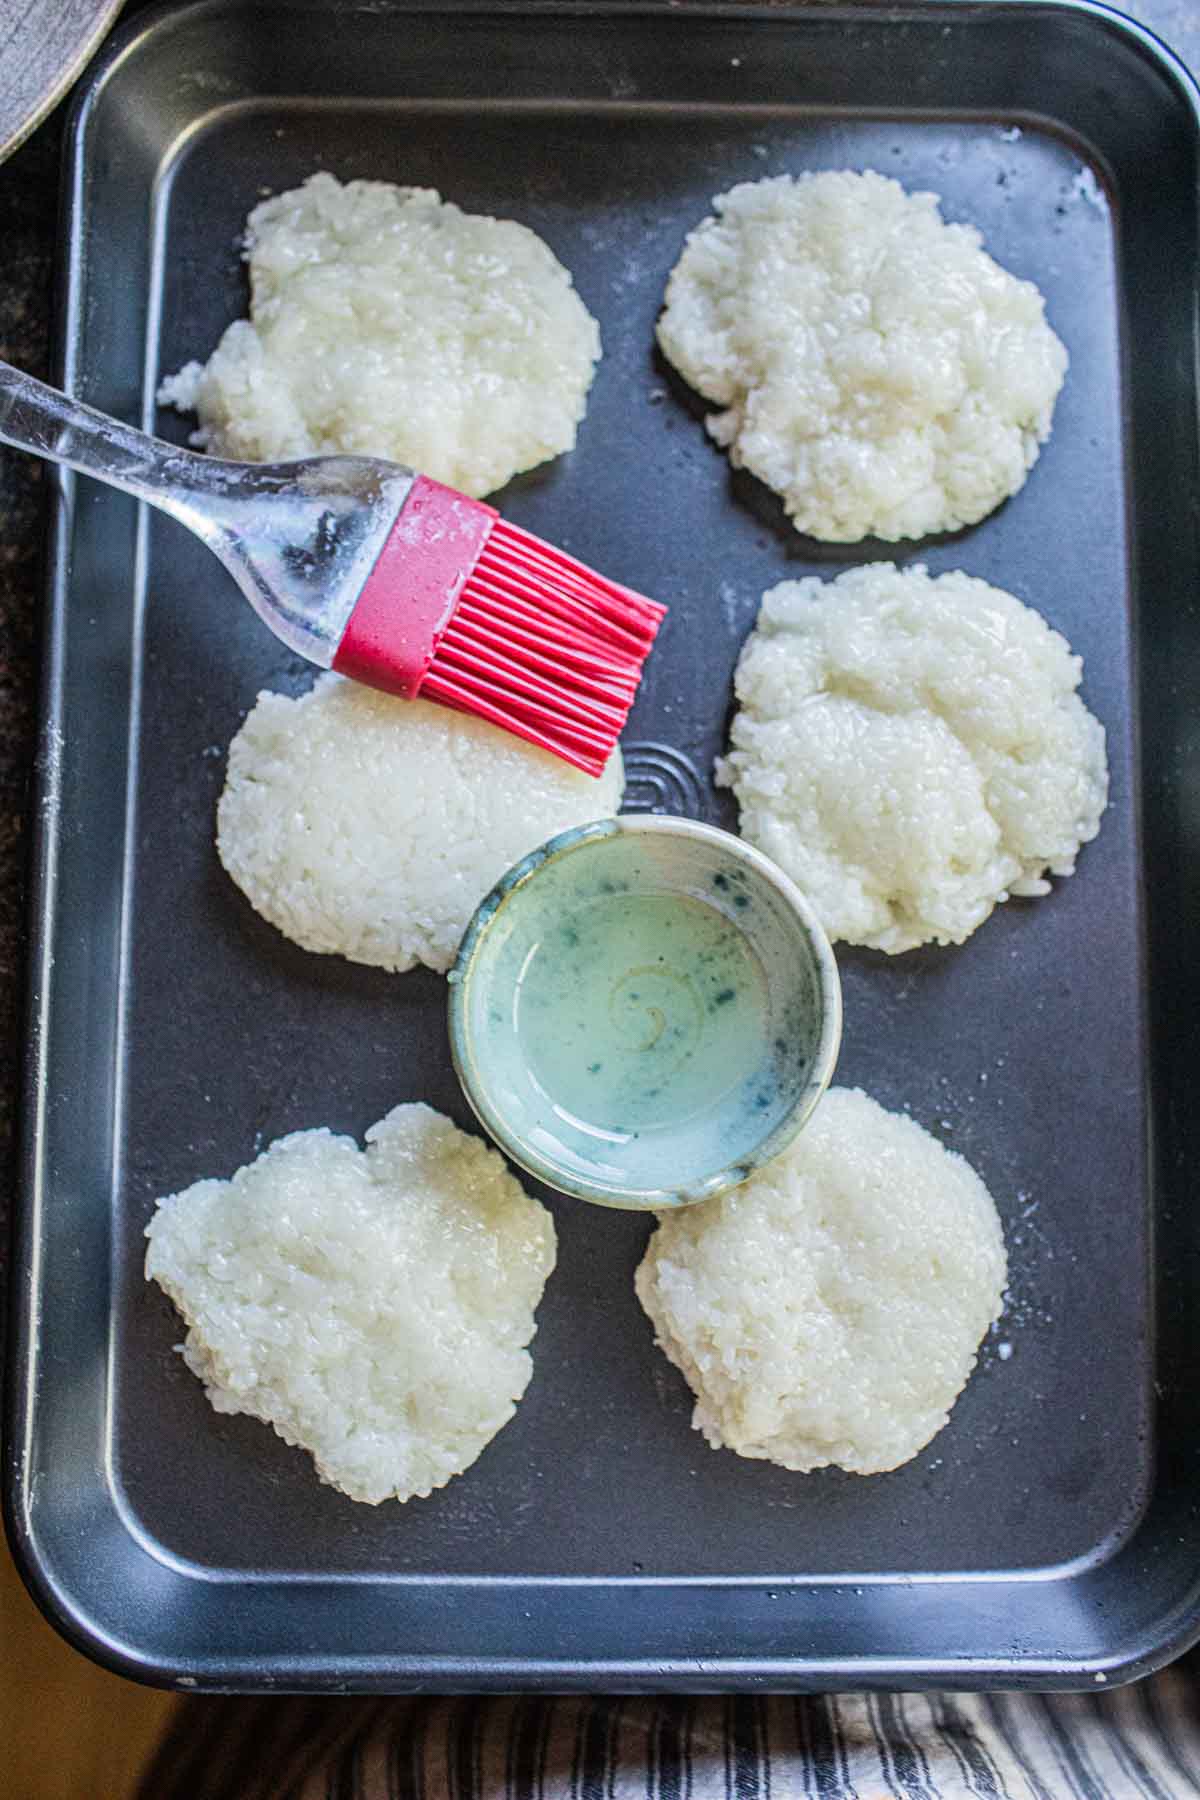 Khao Jee patties on a baking tray with oil and brush.